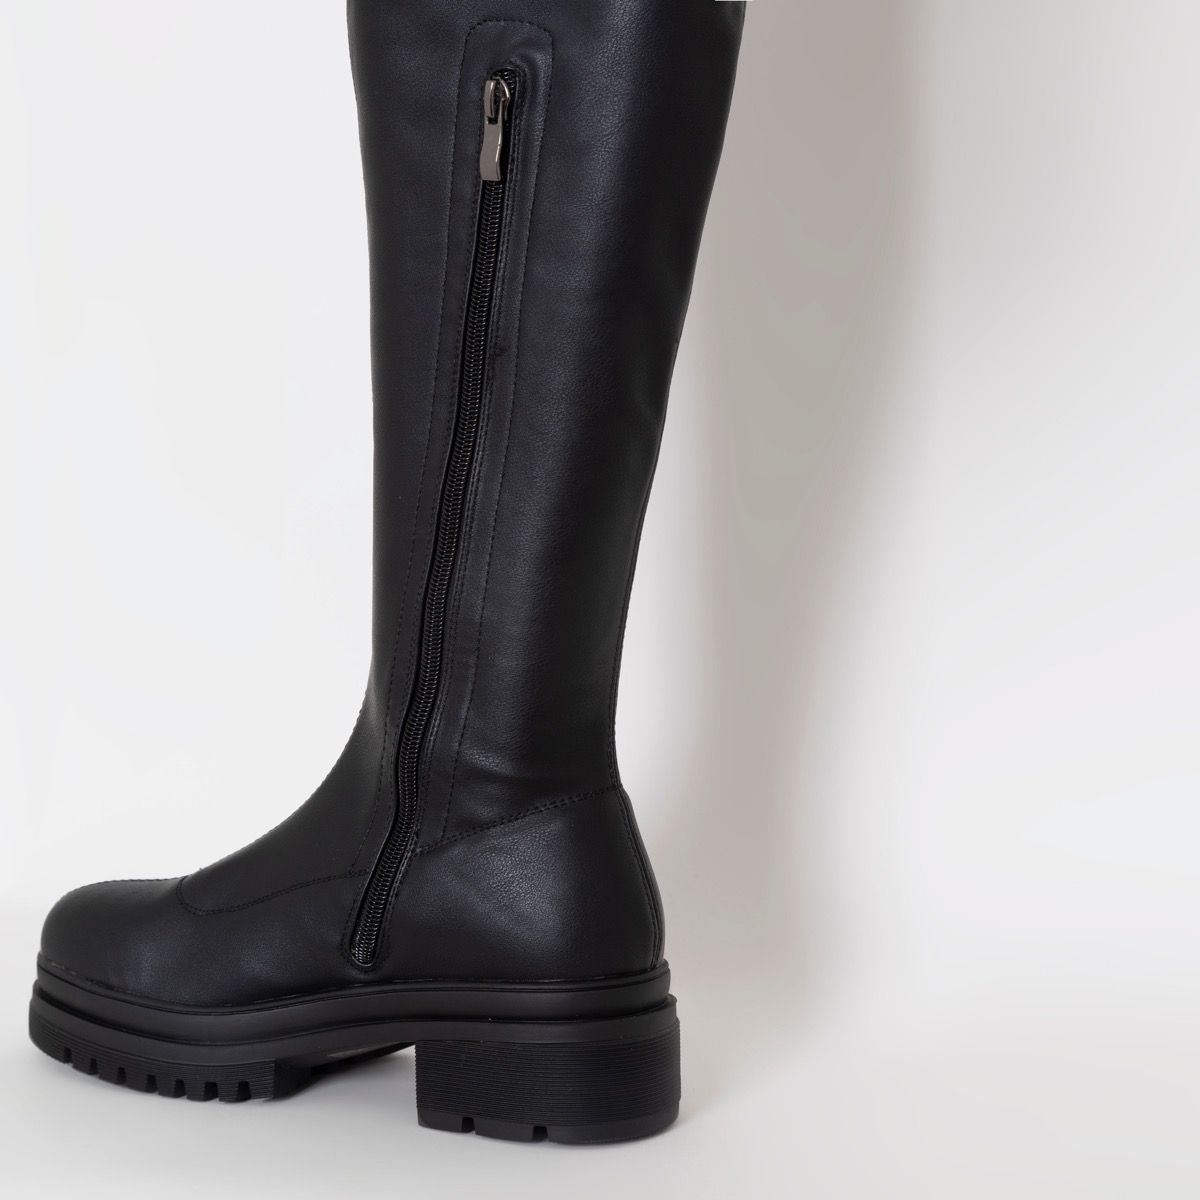 Genesis Black Stretch Over The Knee Boots